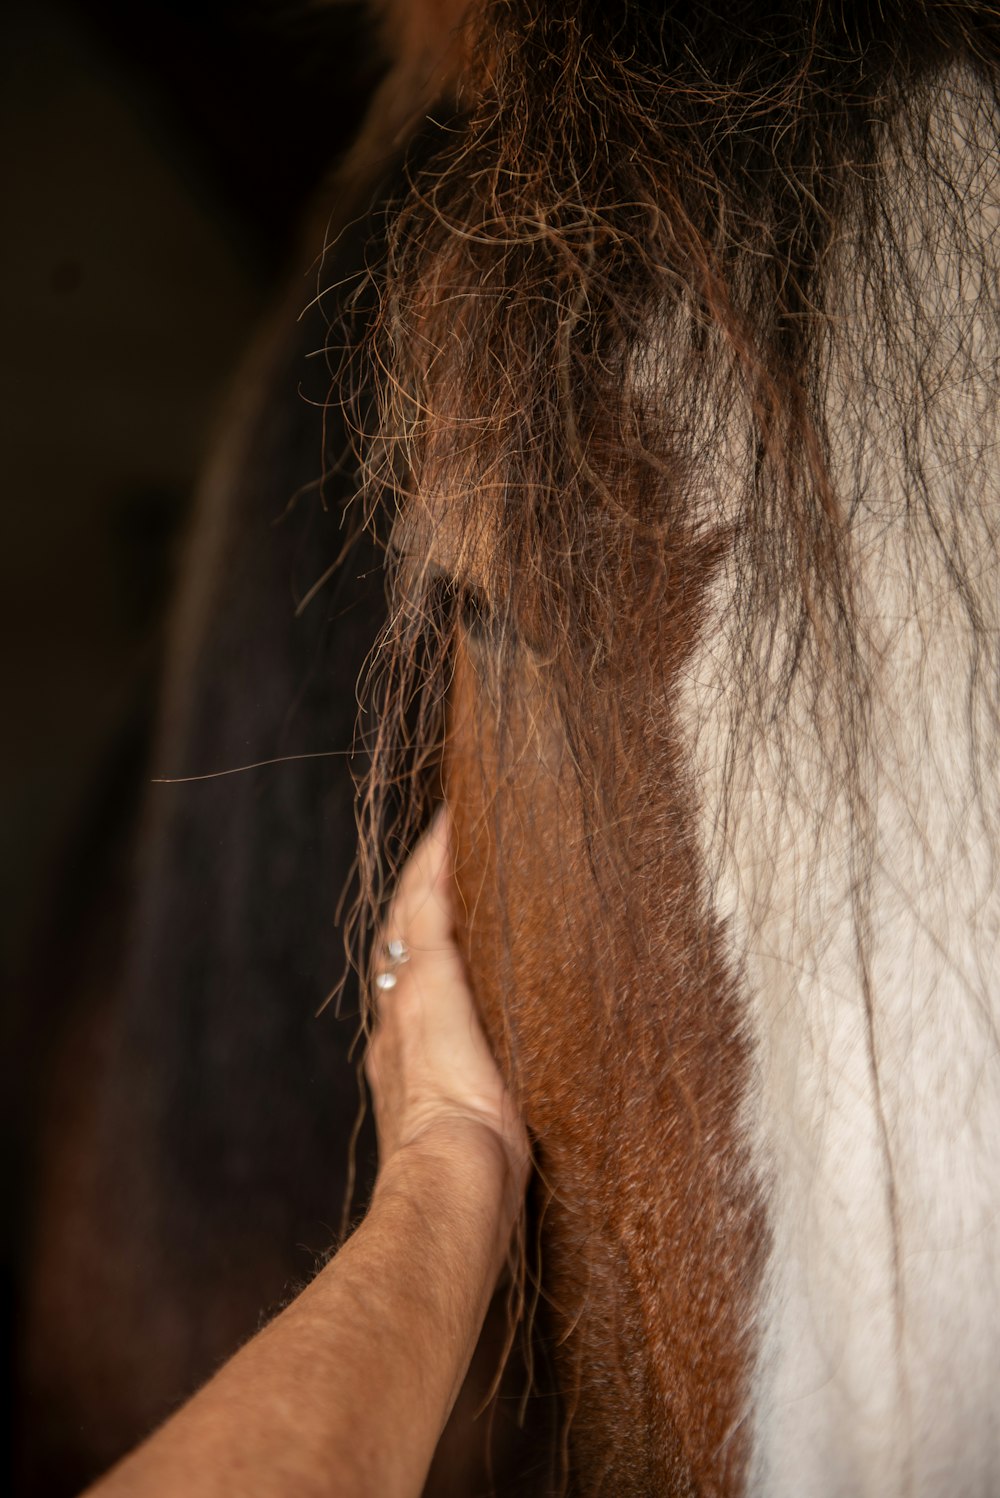 a close up of a person brushing a horse's hair